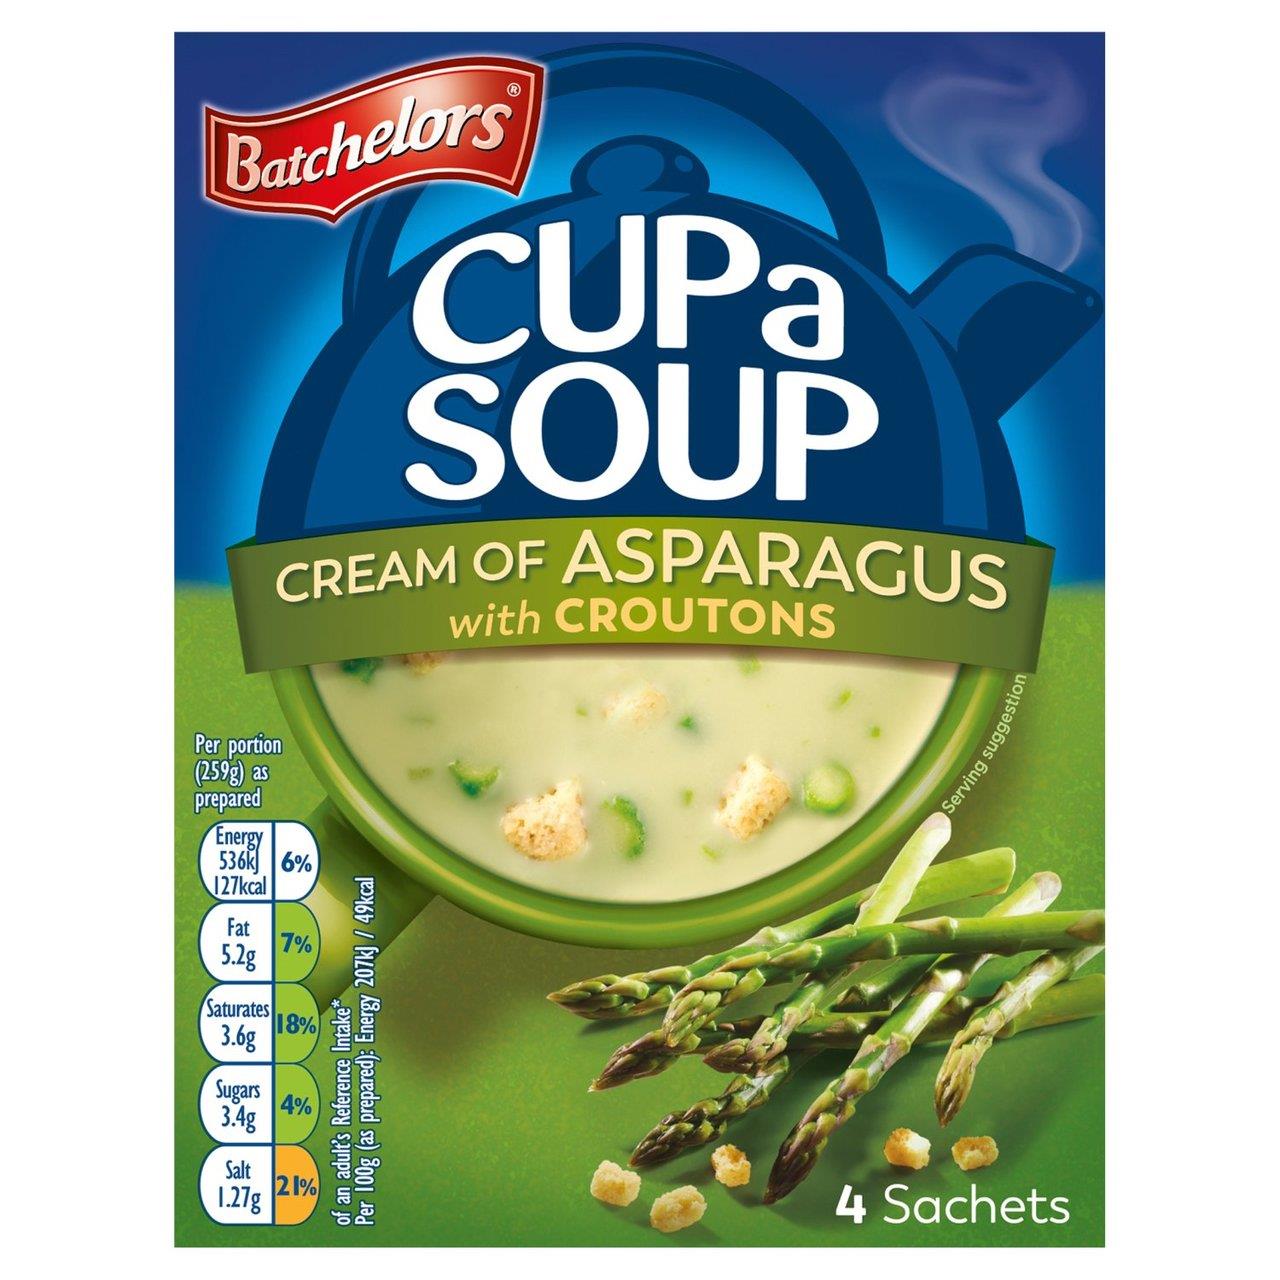 Batchelors Cream of Asparagus Croutons Soup 4 Pack